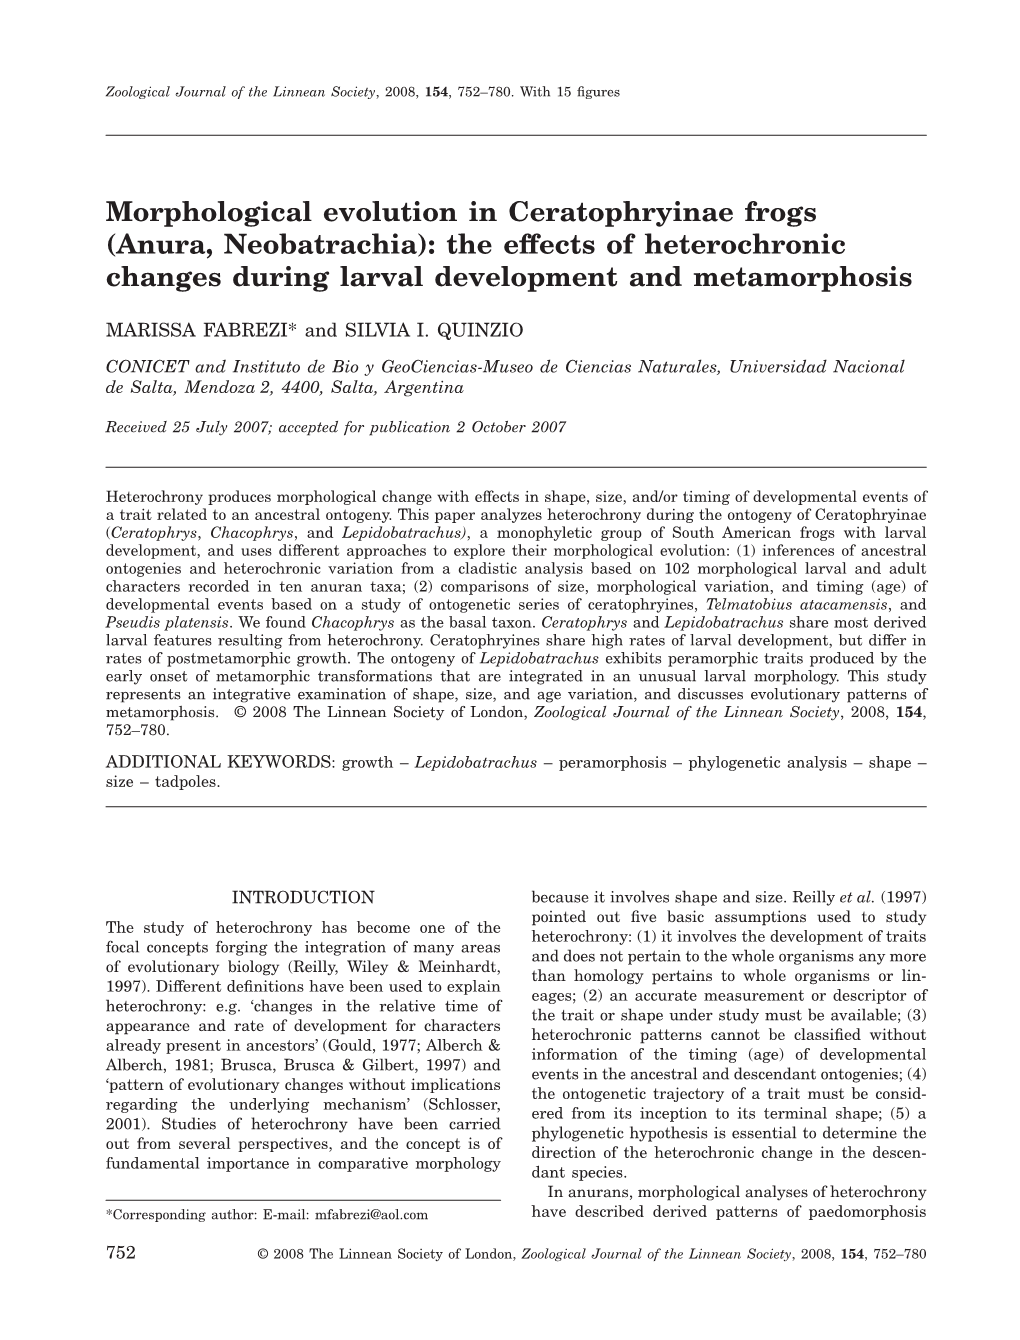 Morphological Evolution in Ceratophryinae Frogs (Anura, Neobatrachia): the Effects of Heterochronic Changes During Larval Development and Metamorphosis